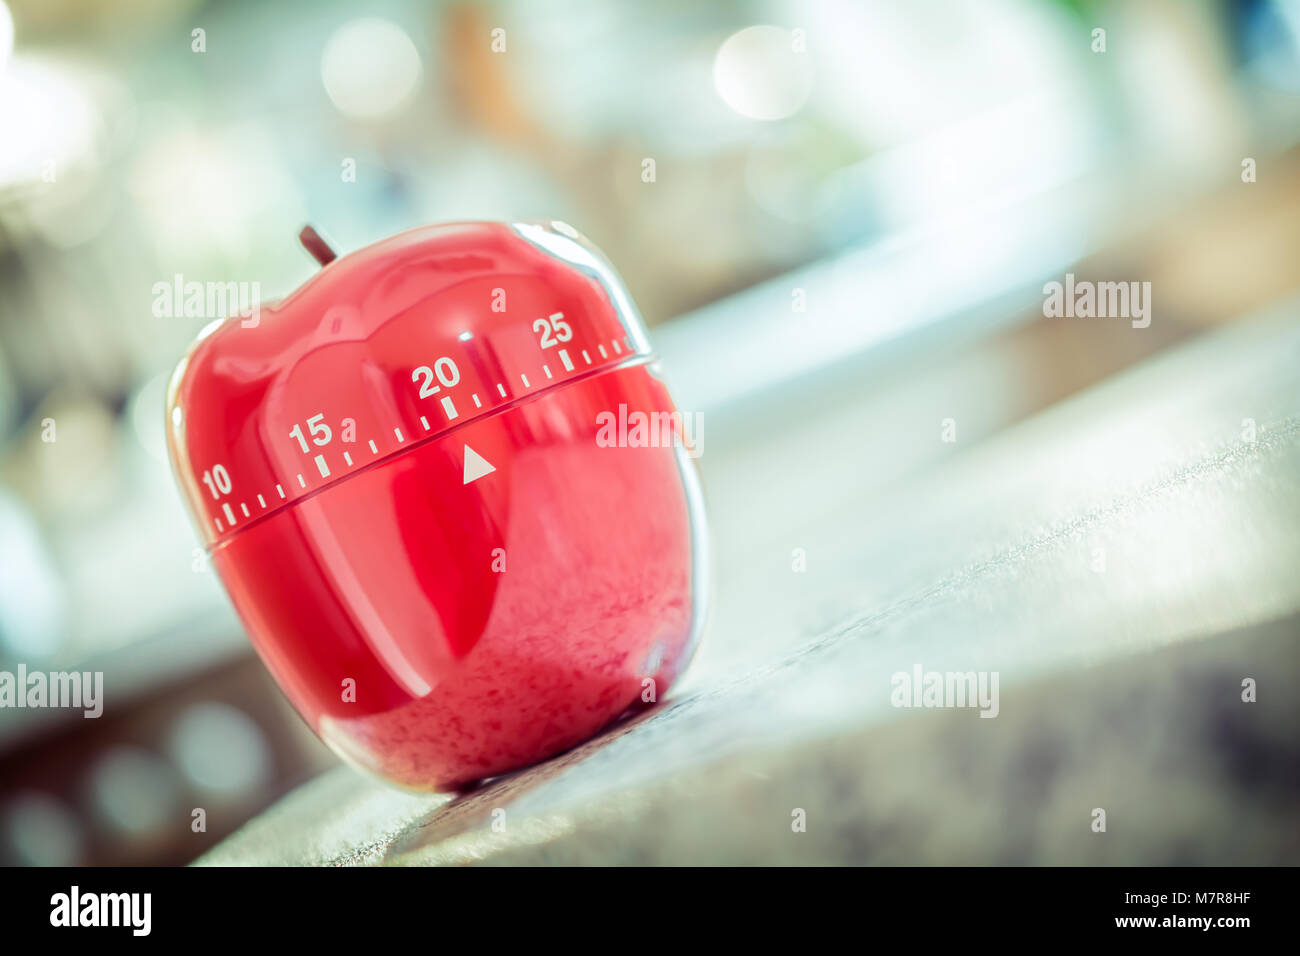 20 Minutes - Red Kitchen Egg Timer In Apple Shape Stock Photo Alamy